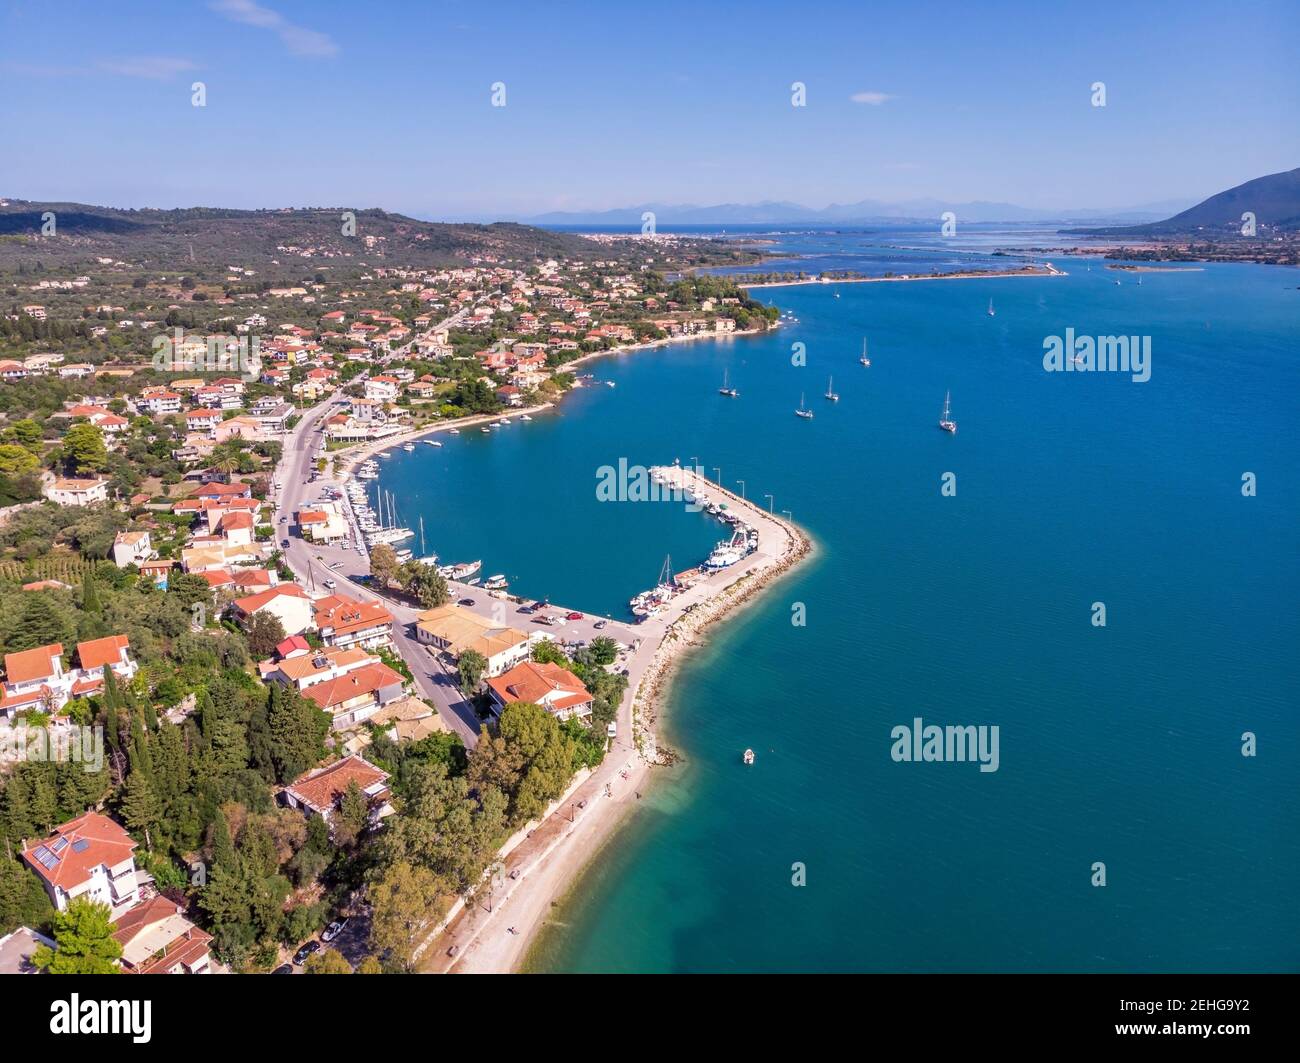 Aerial drone bird's eye view photo of iconic port of Nidri or Nydri a safe harbor for sail boats and famous for trips to Meganisi, Skorpios and other Stock Photo